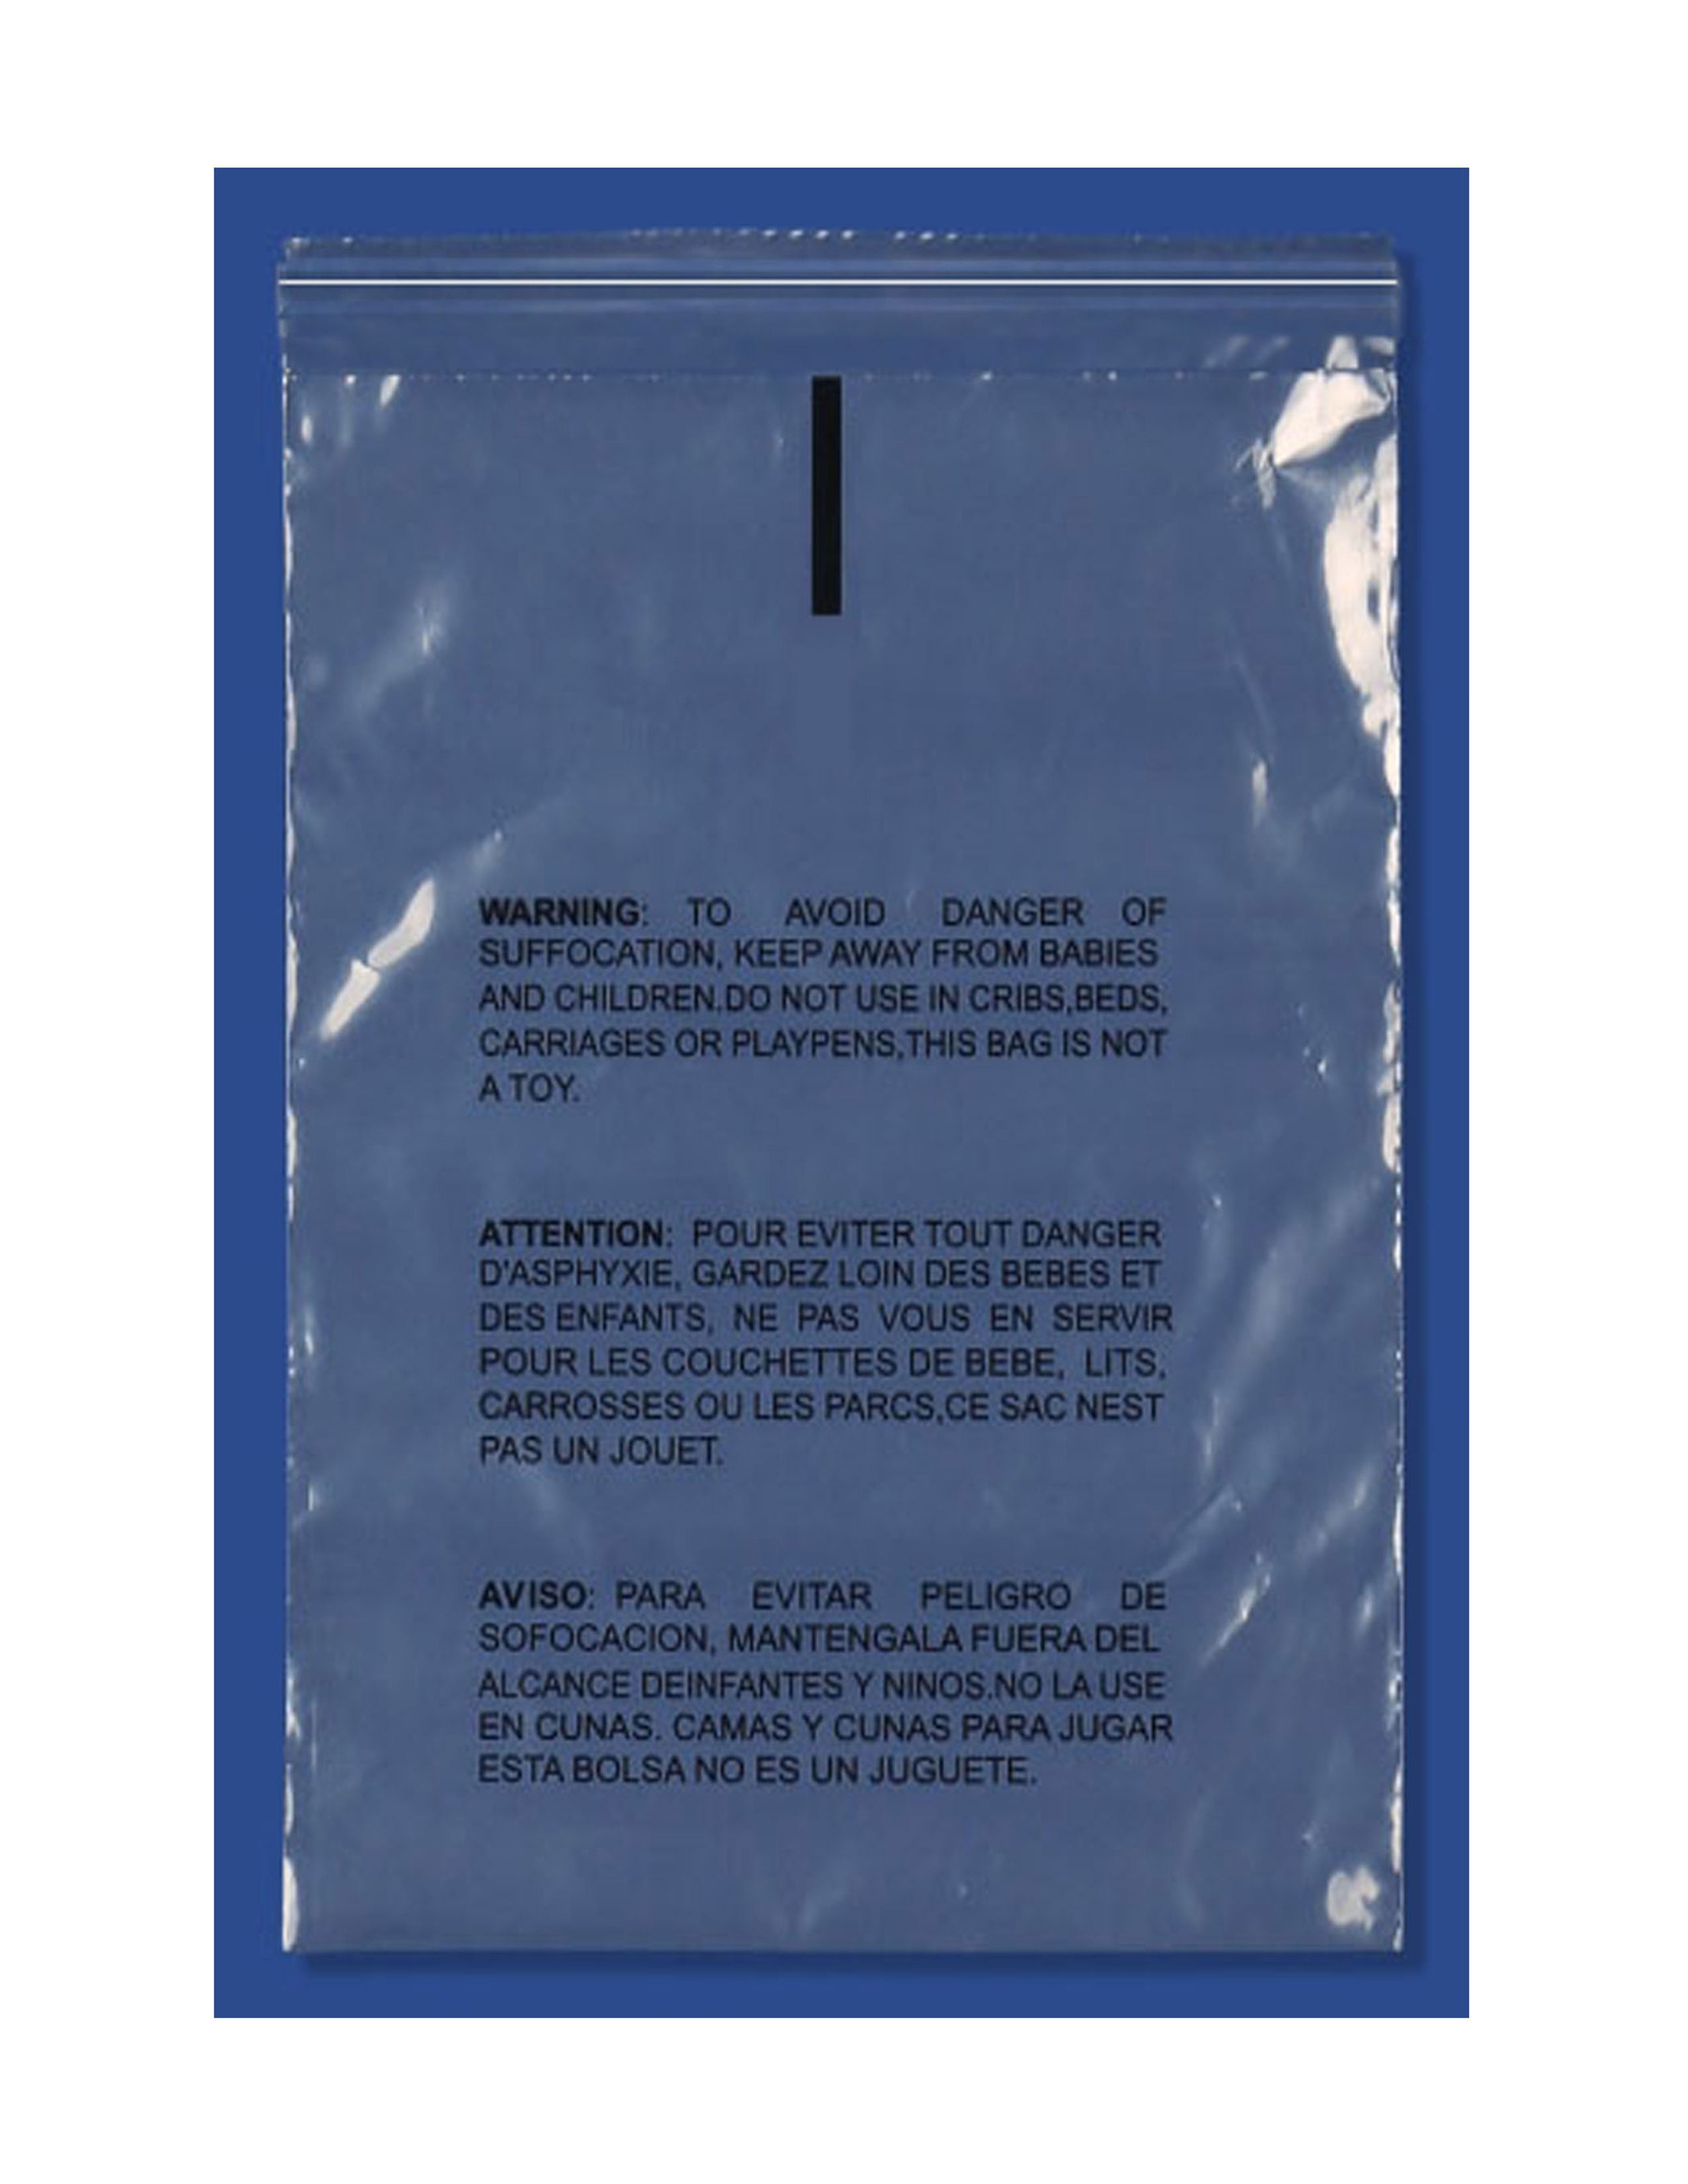 Clear Resealable Poly Bags 12" x 15.5" with Suffocation Warning 1.5 Mil 1000 pcs 